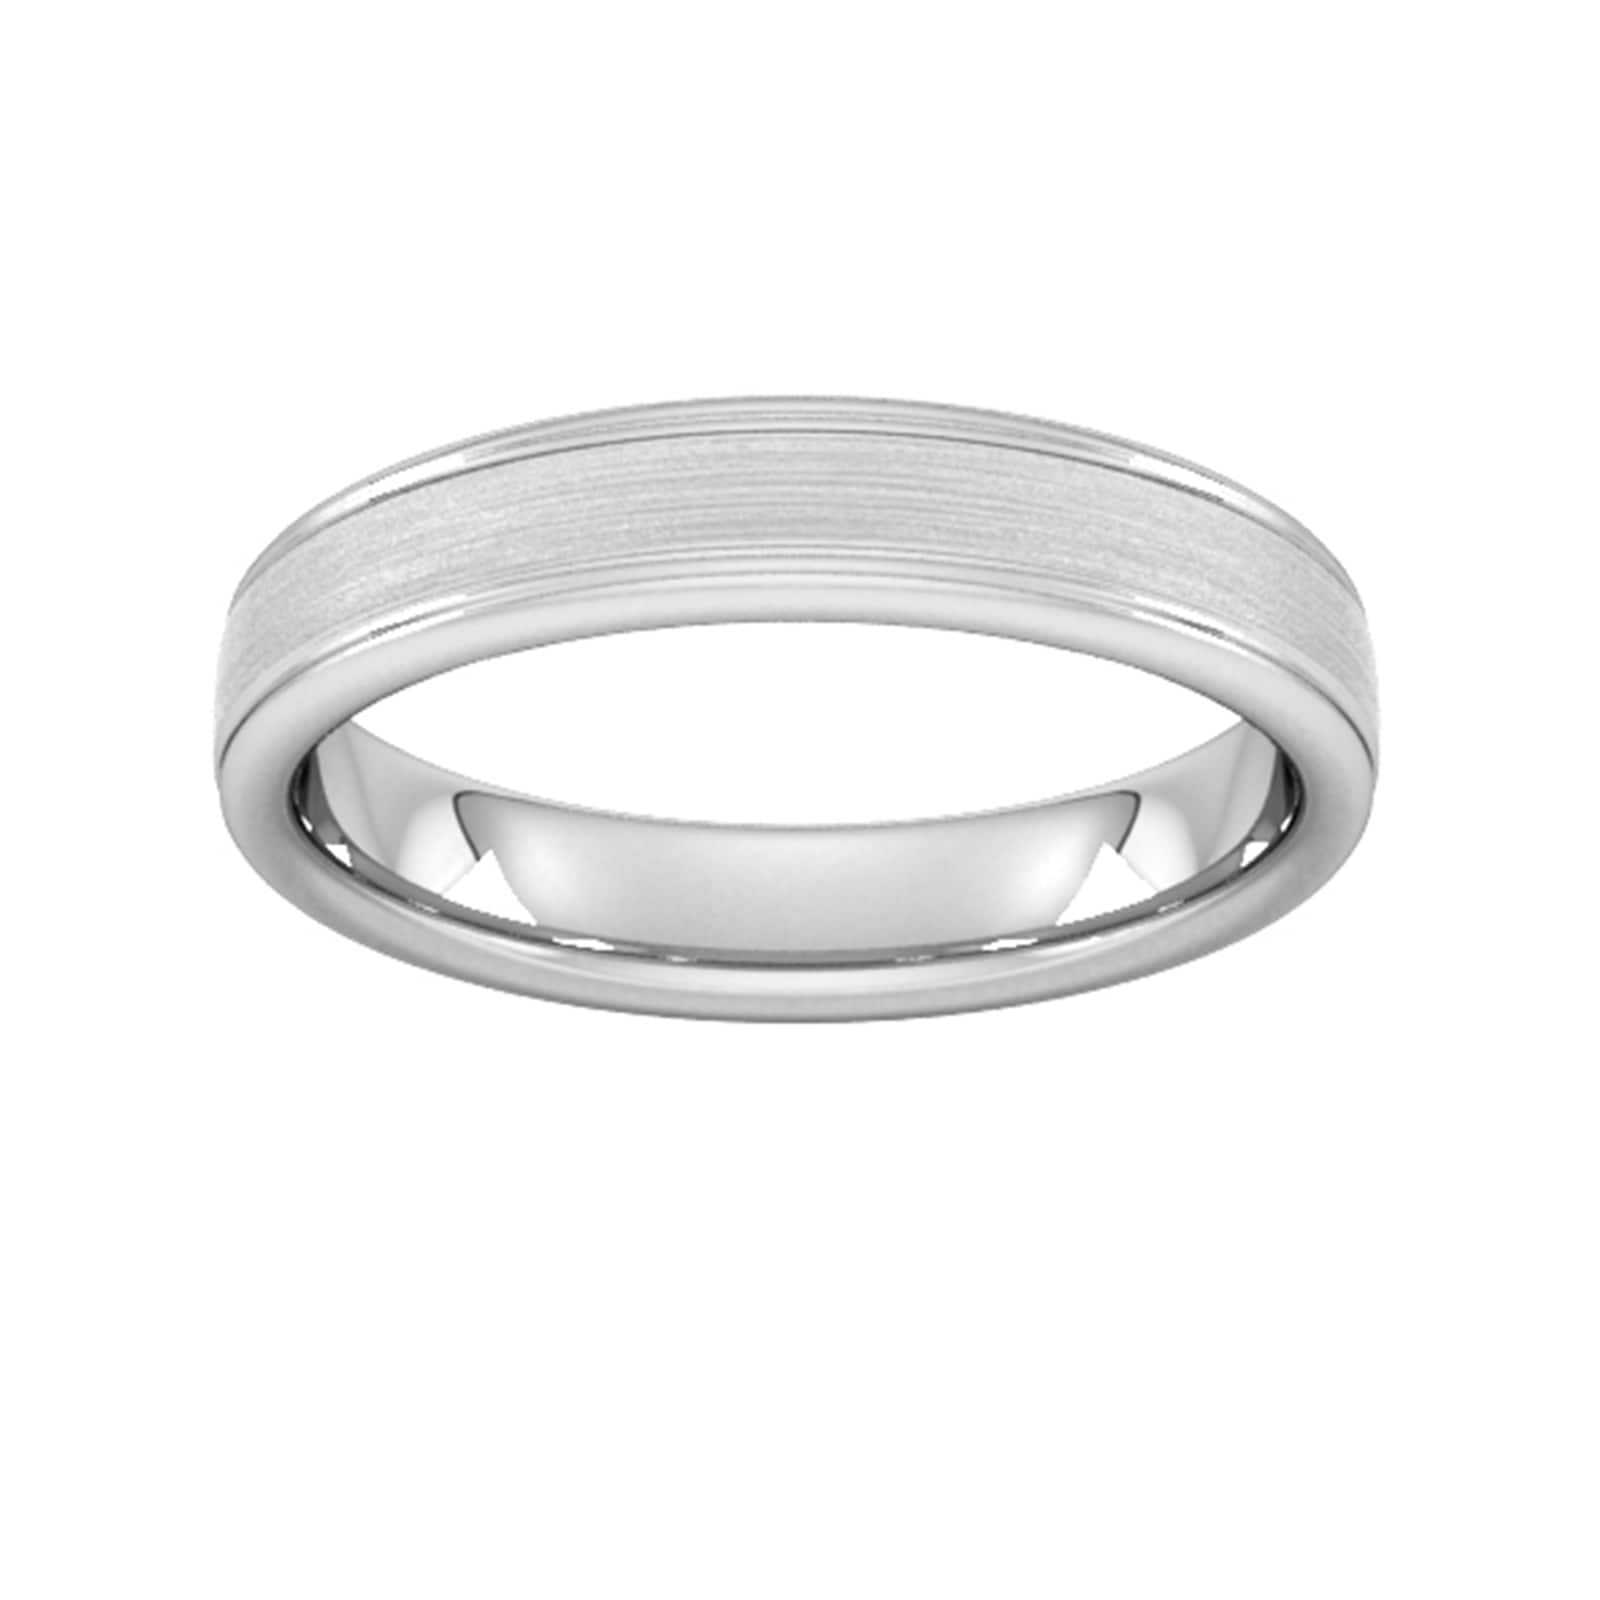 4mm Traditional Court Standard Matt Centre With Grooves Wedding Ring In 18 Carat White Gold - Ring Size V